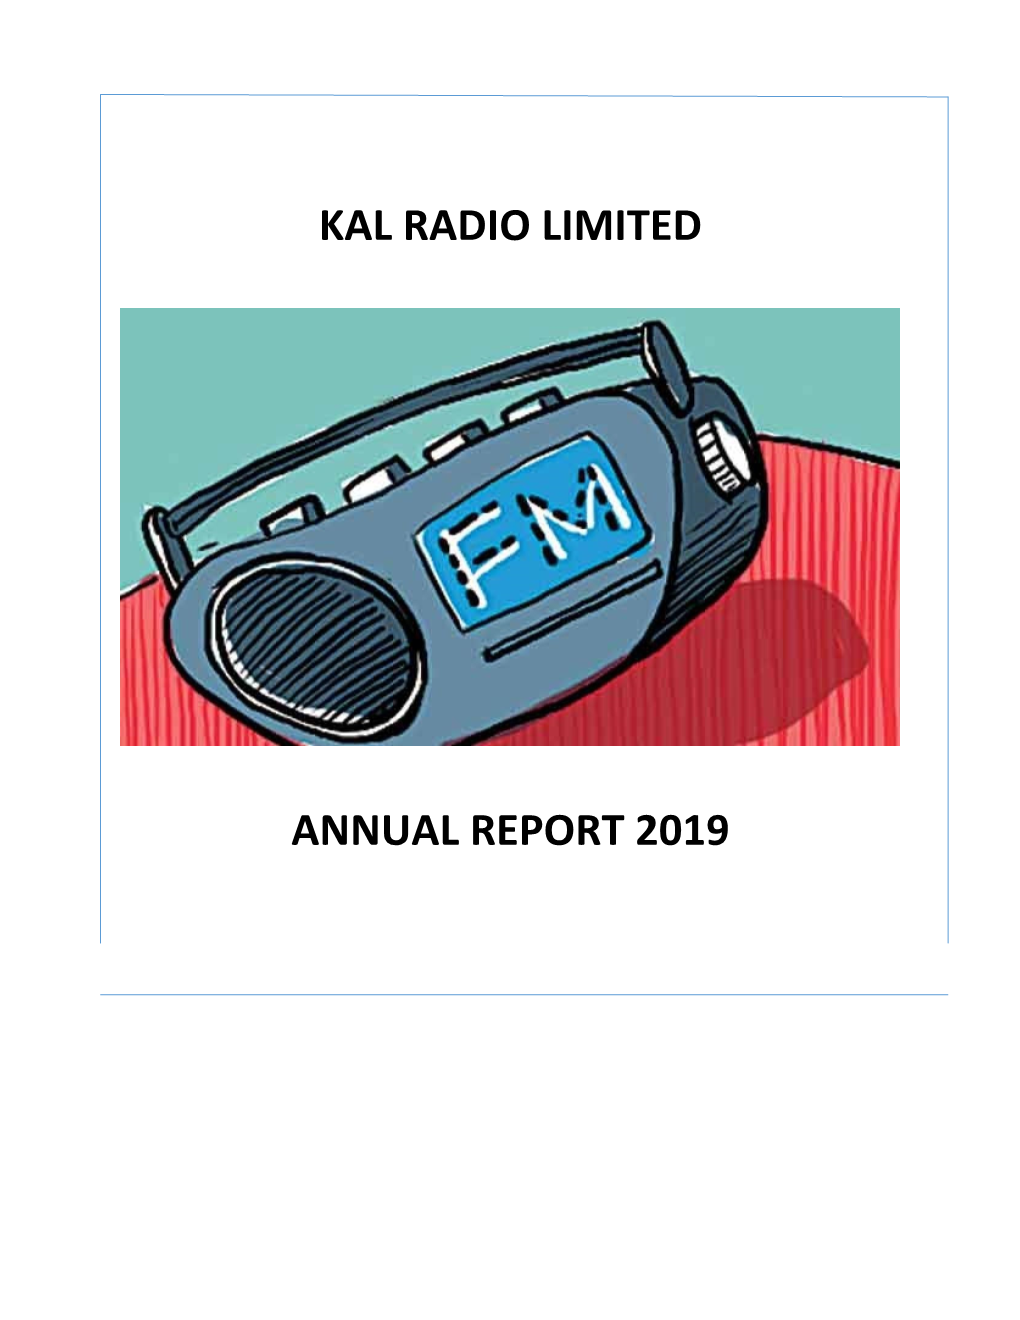 Kal Radio Limited Annual Report 2019